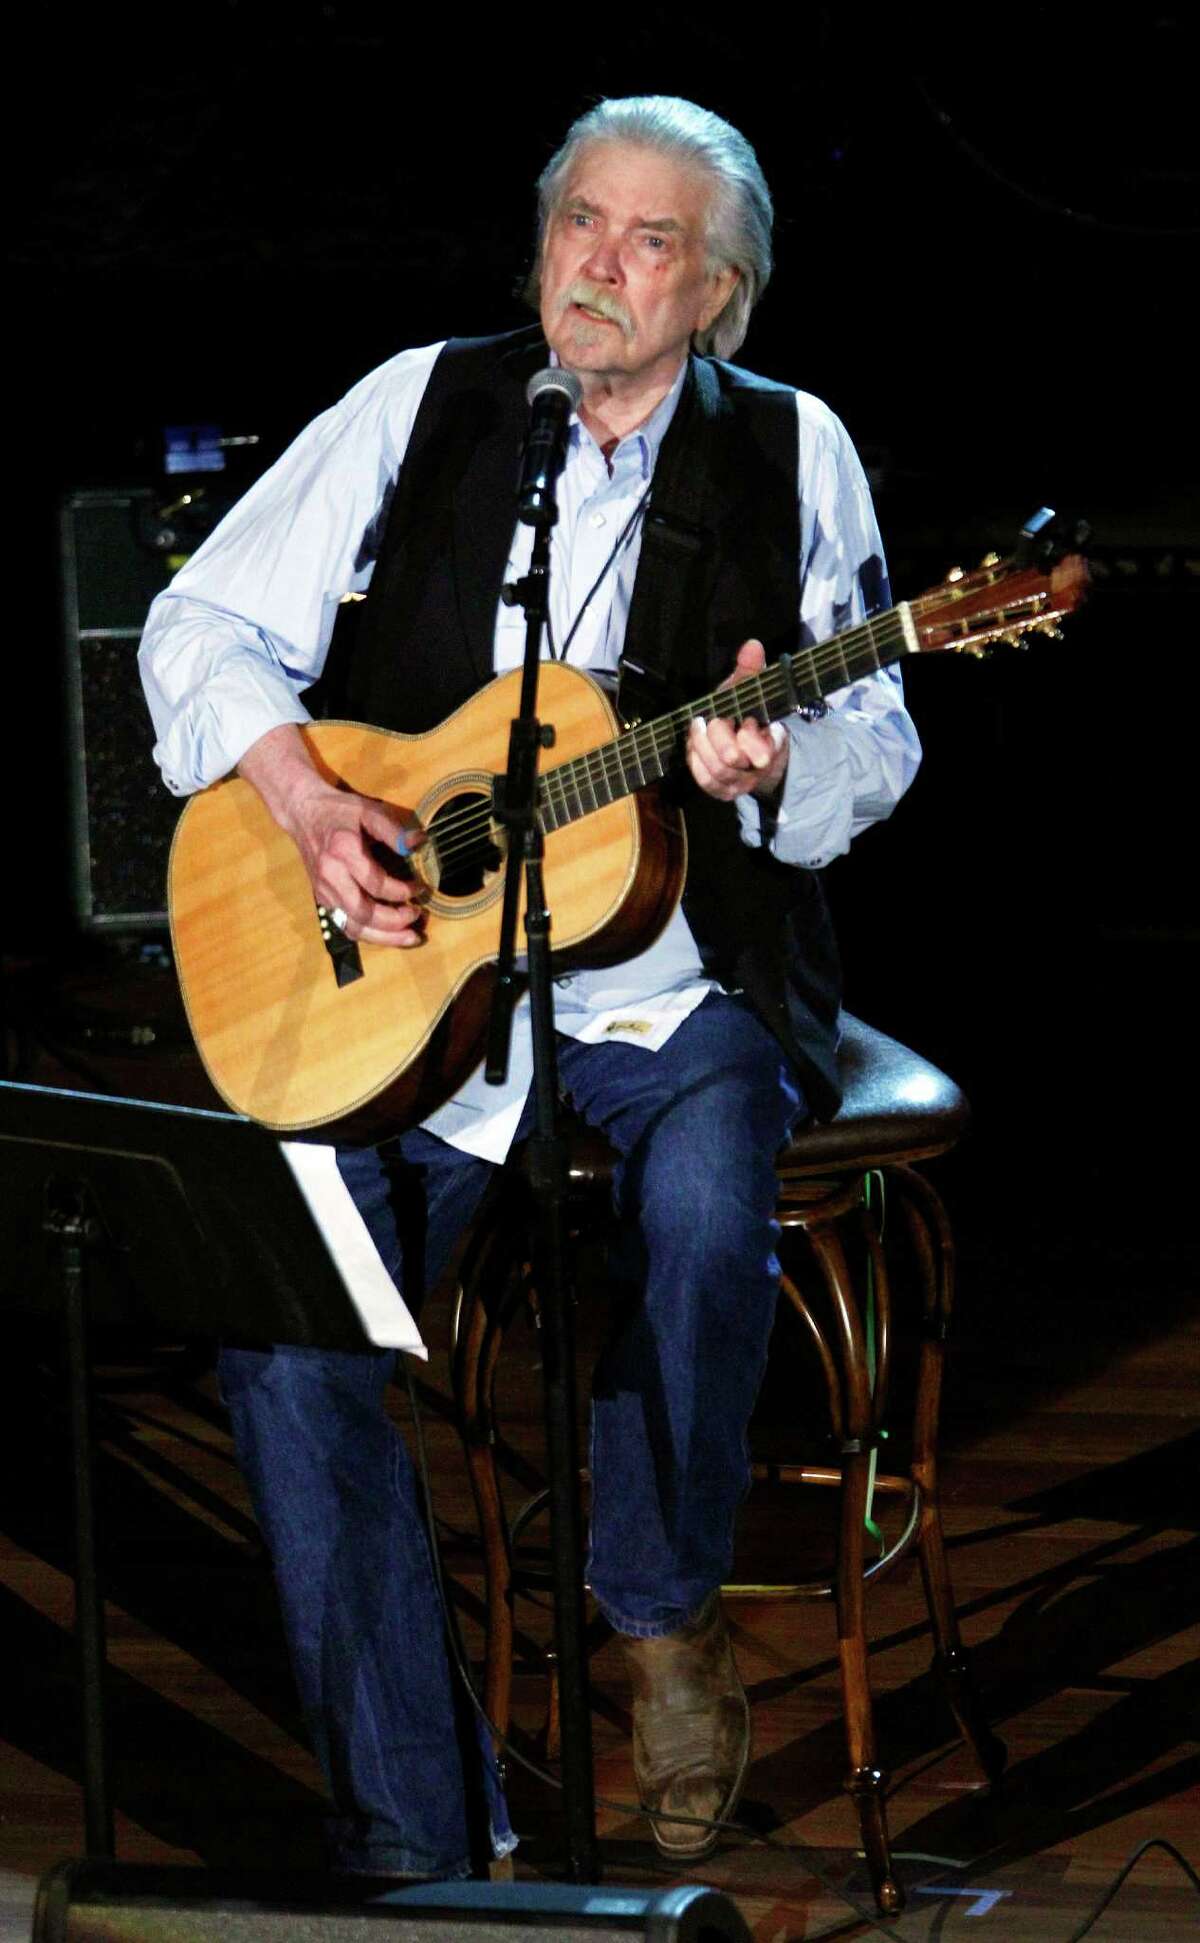 Guy Clark performs at the 11th annual Americana Honors and Awards in Nashville, Tenn., in 2012.